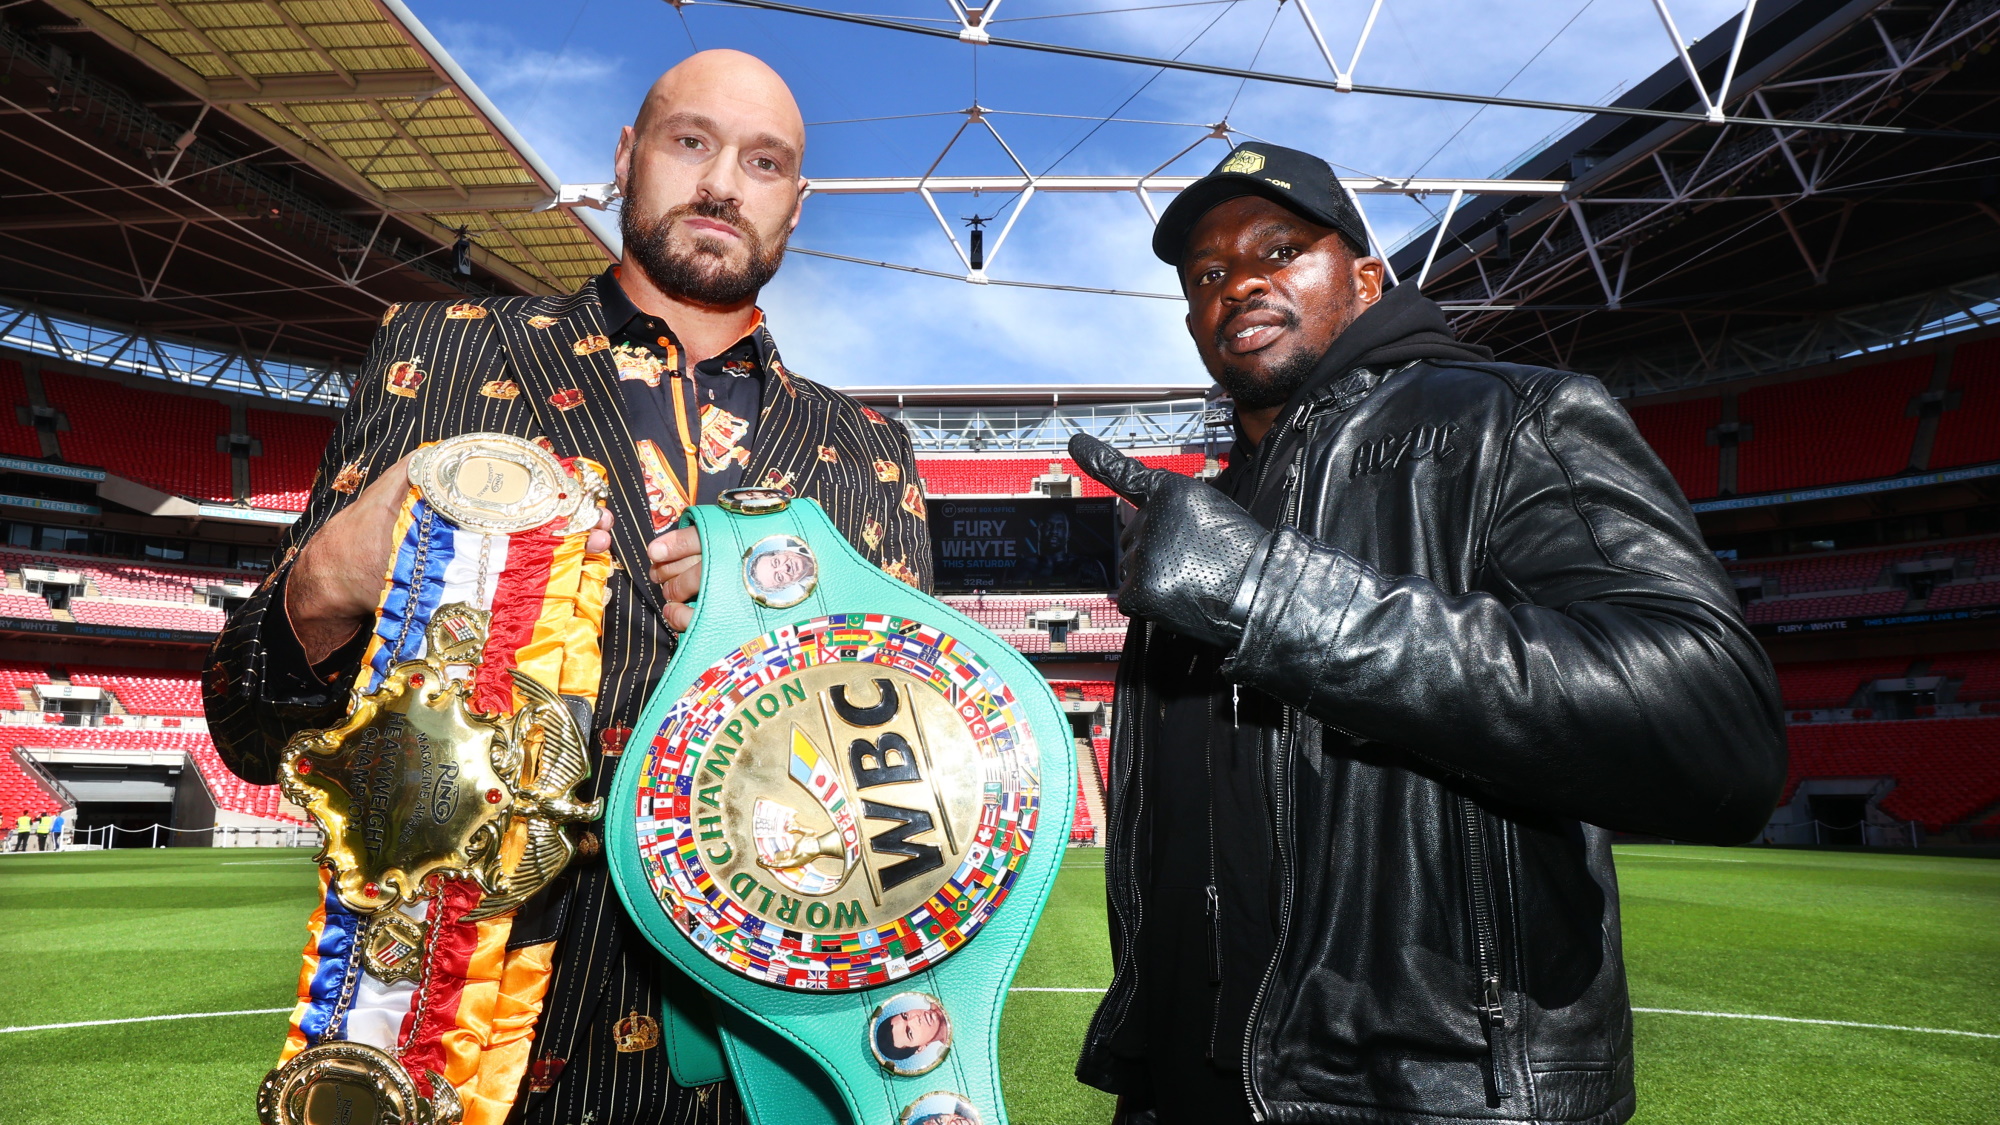 How to watch the Fury vs Whyte fight on a live stream T3